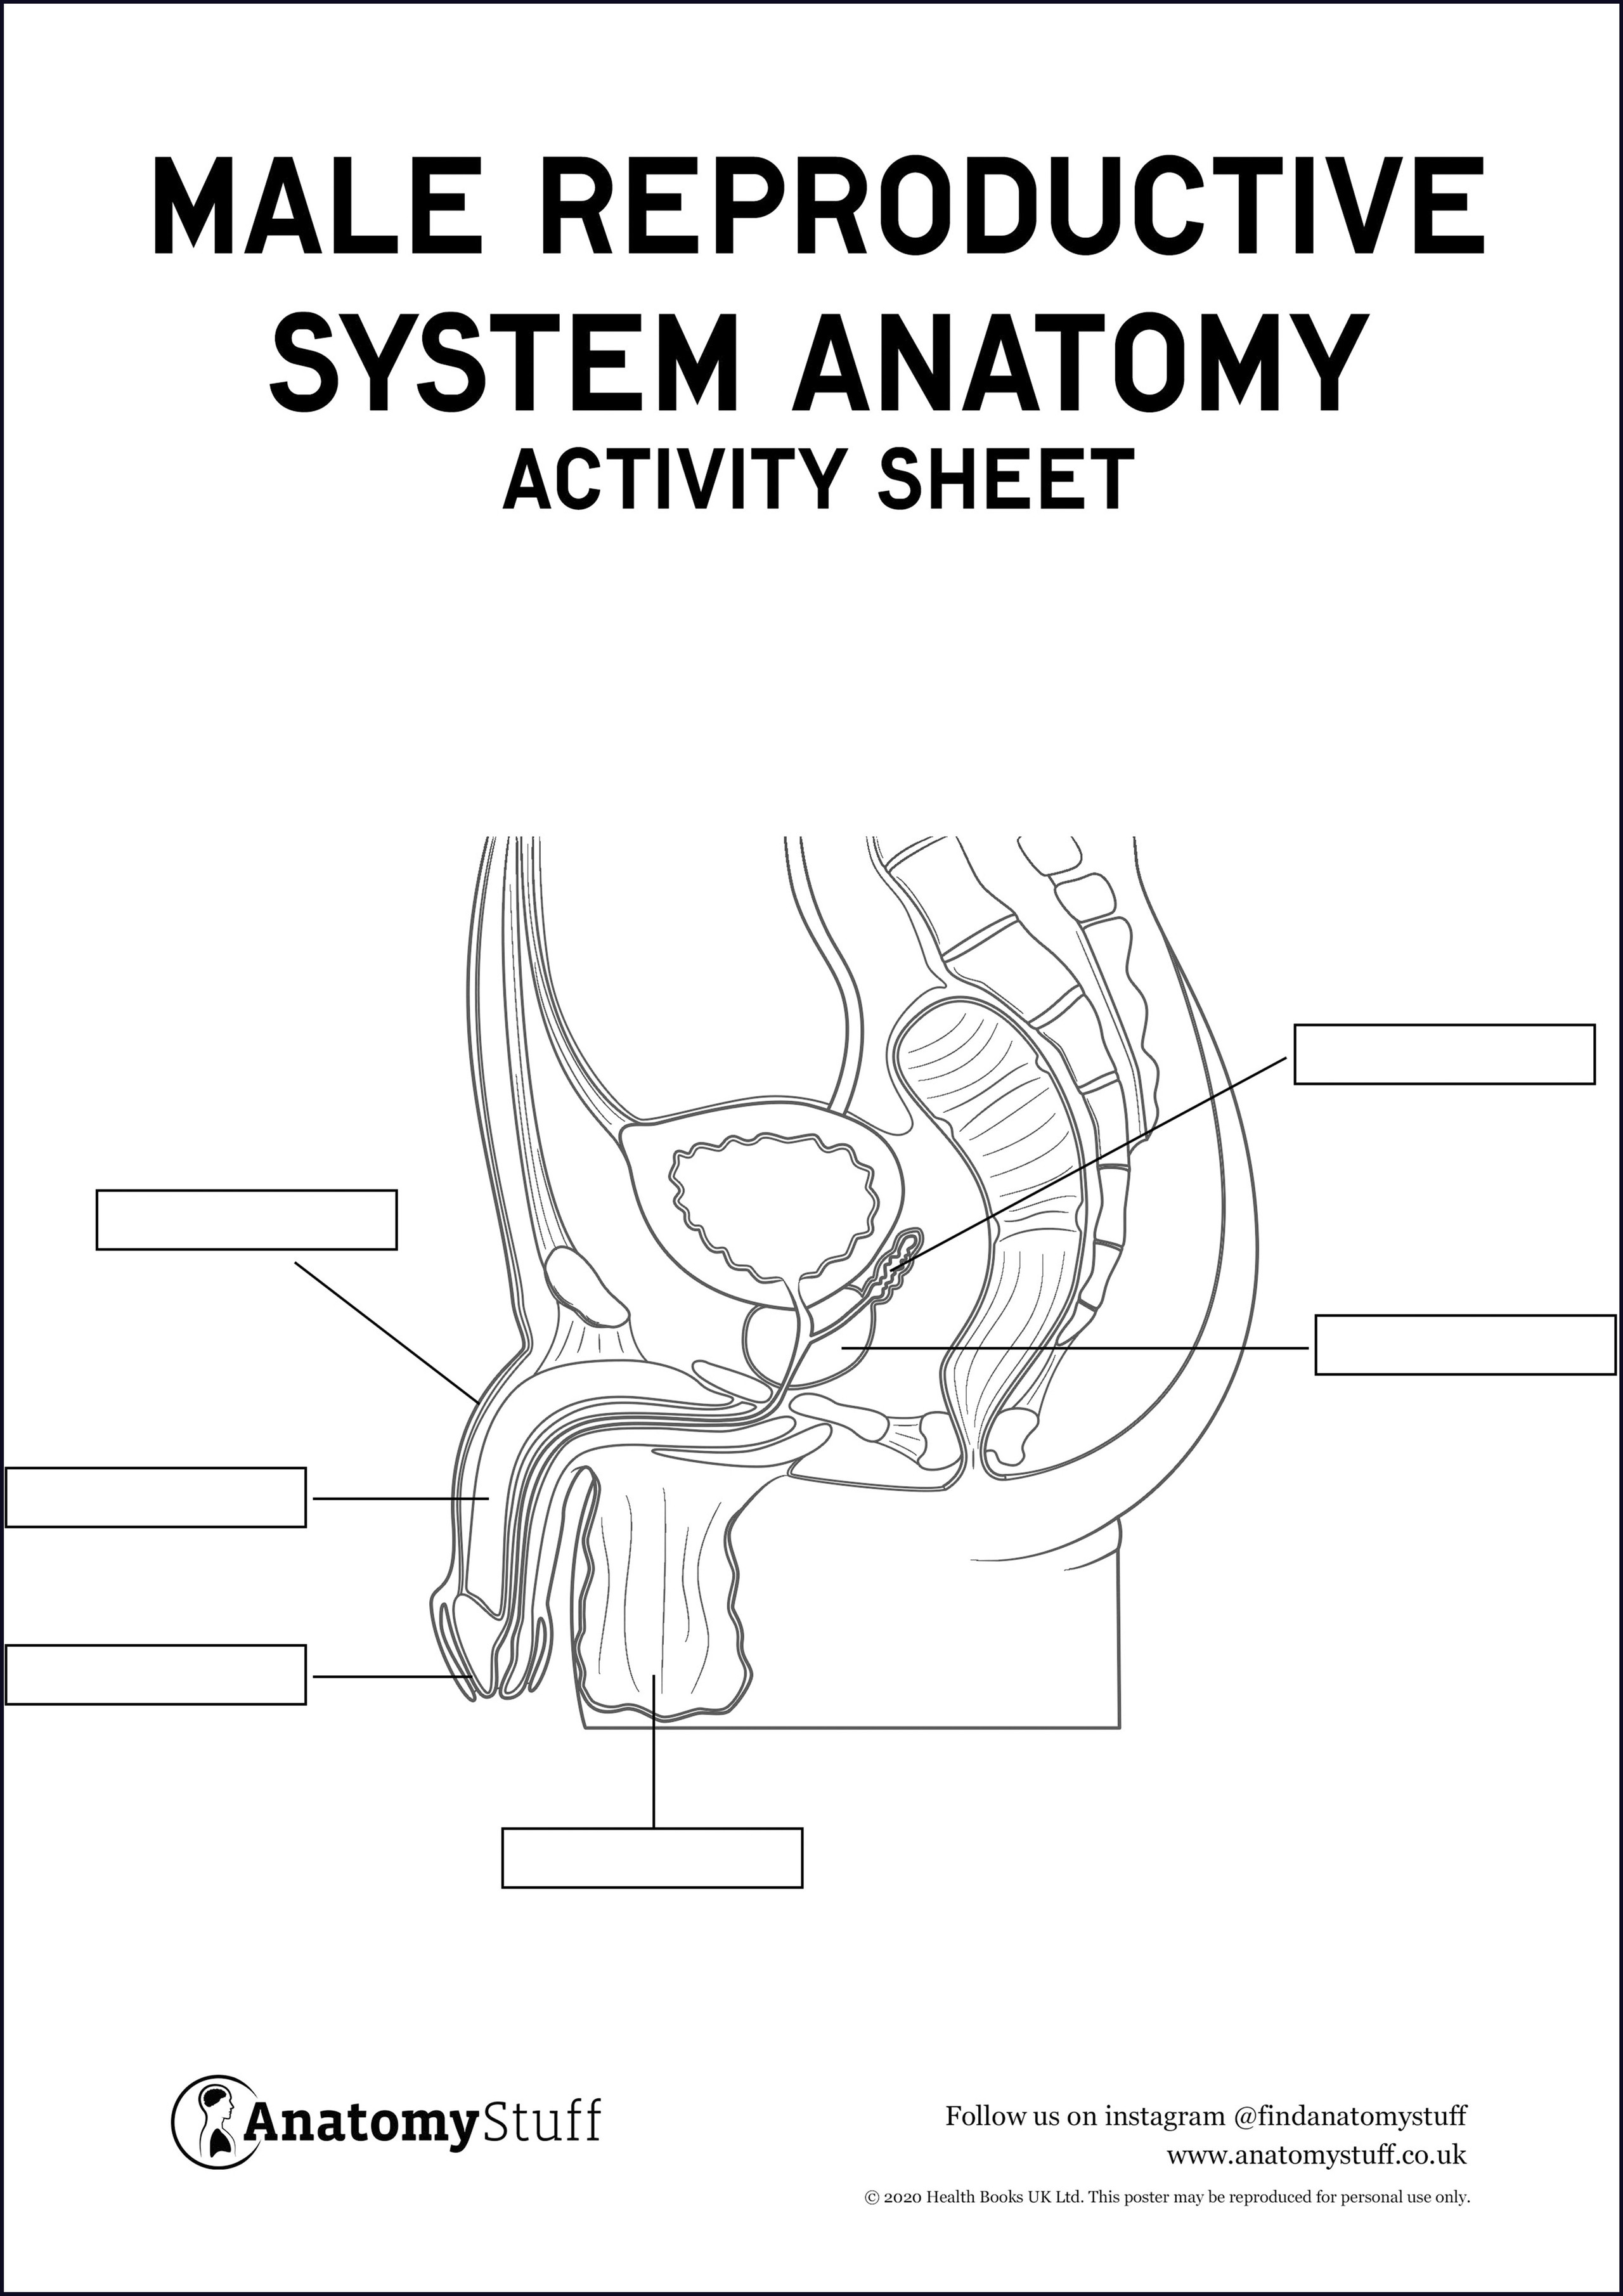 Male Reproductive System Anatomy Activity Sheet Pdf 3592